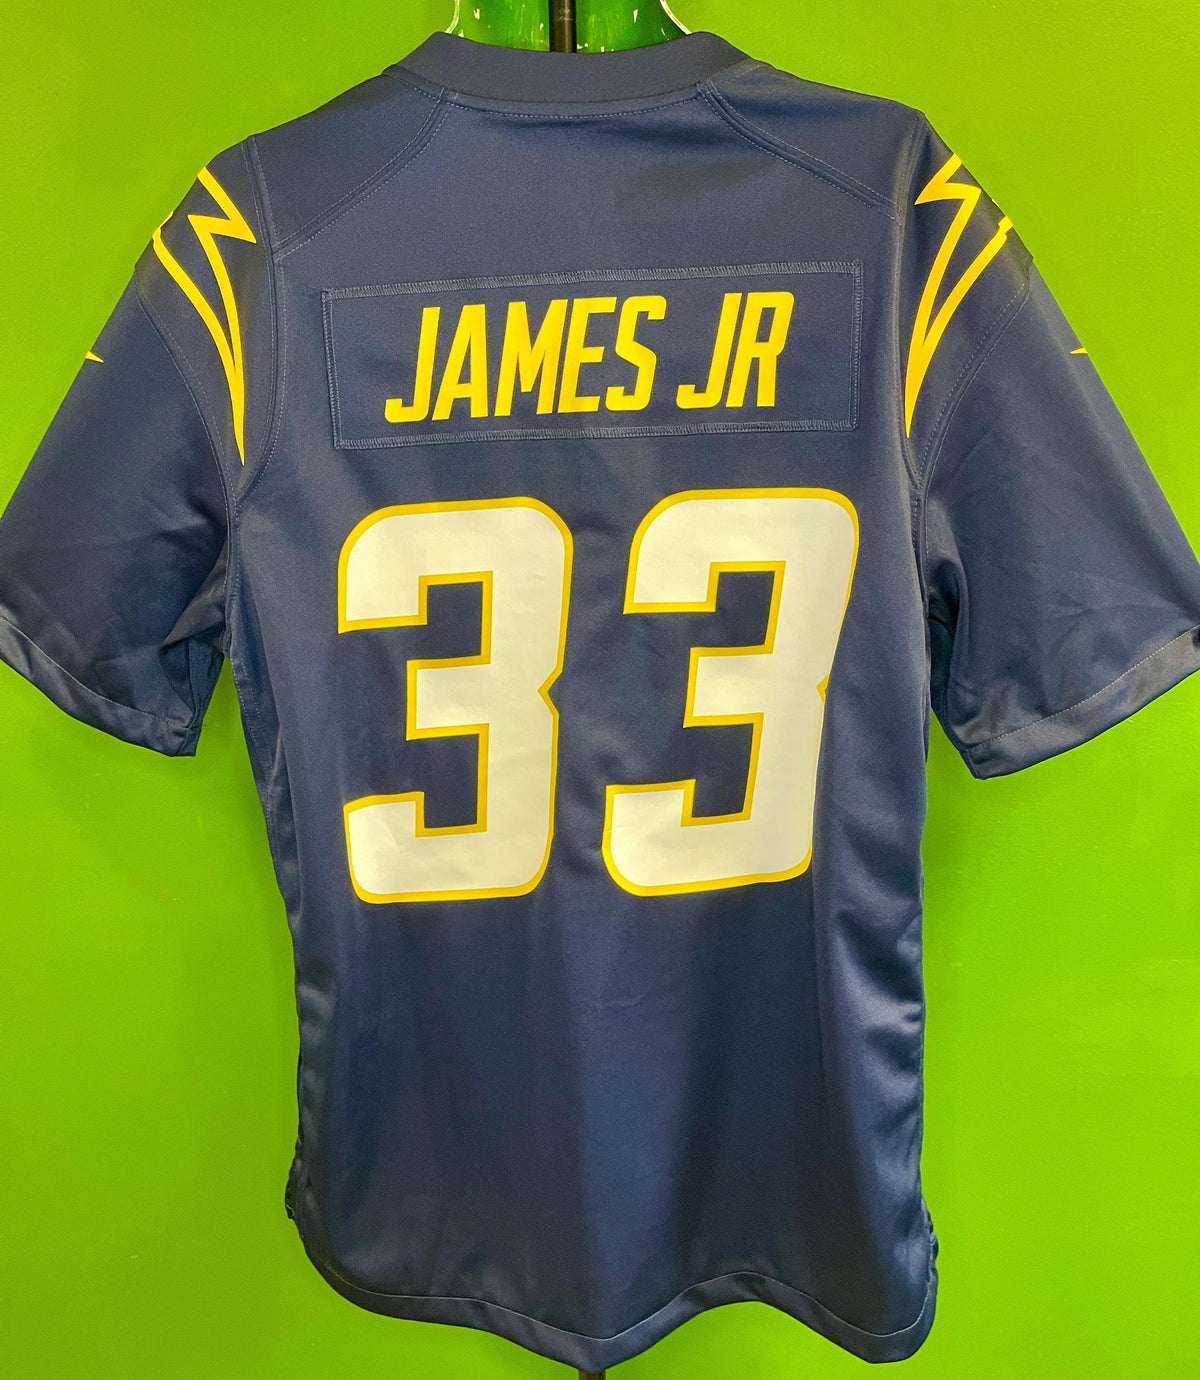 NFL Los Angeles Chargers Derwin James #33 Game Jersey Men's Large NWOT